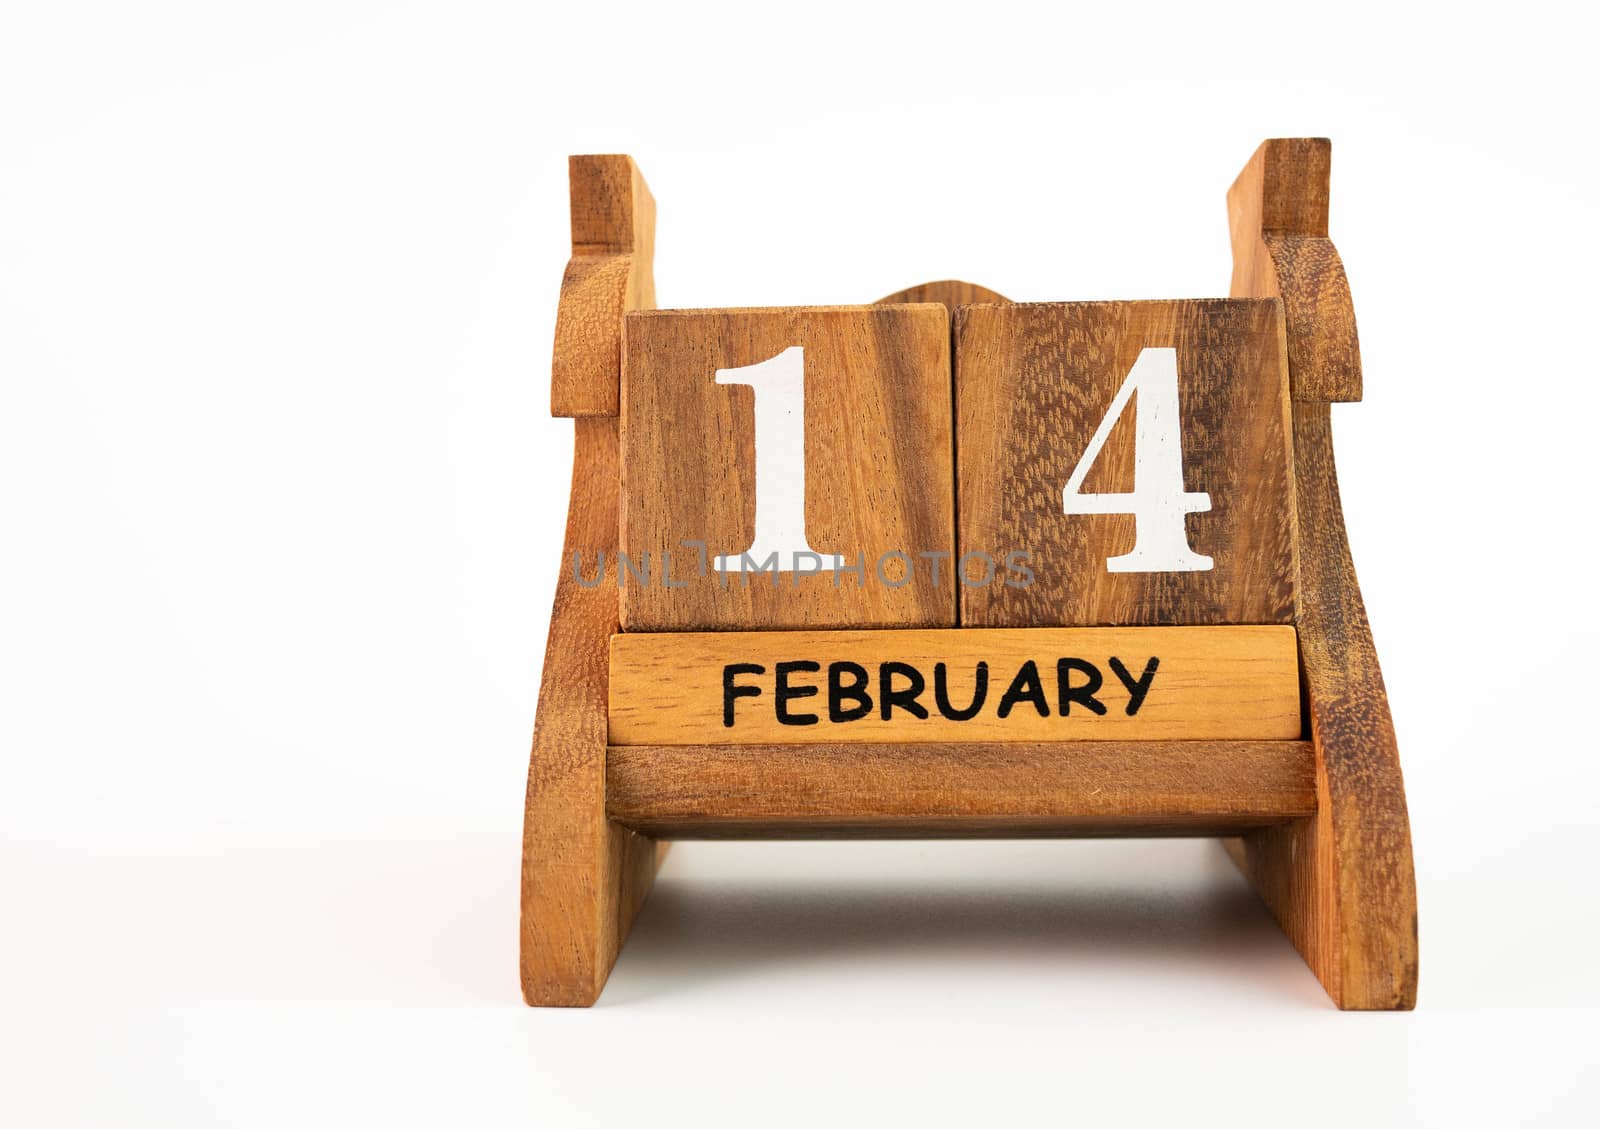 Wooden calendar on February 14 date, isolated on white background. Concept of Valentine's day. by TEERASAK